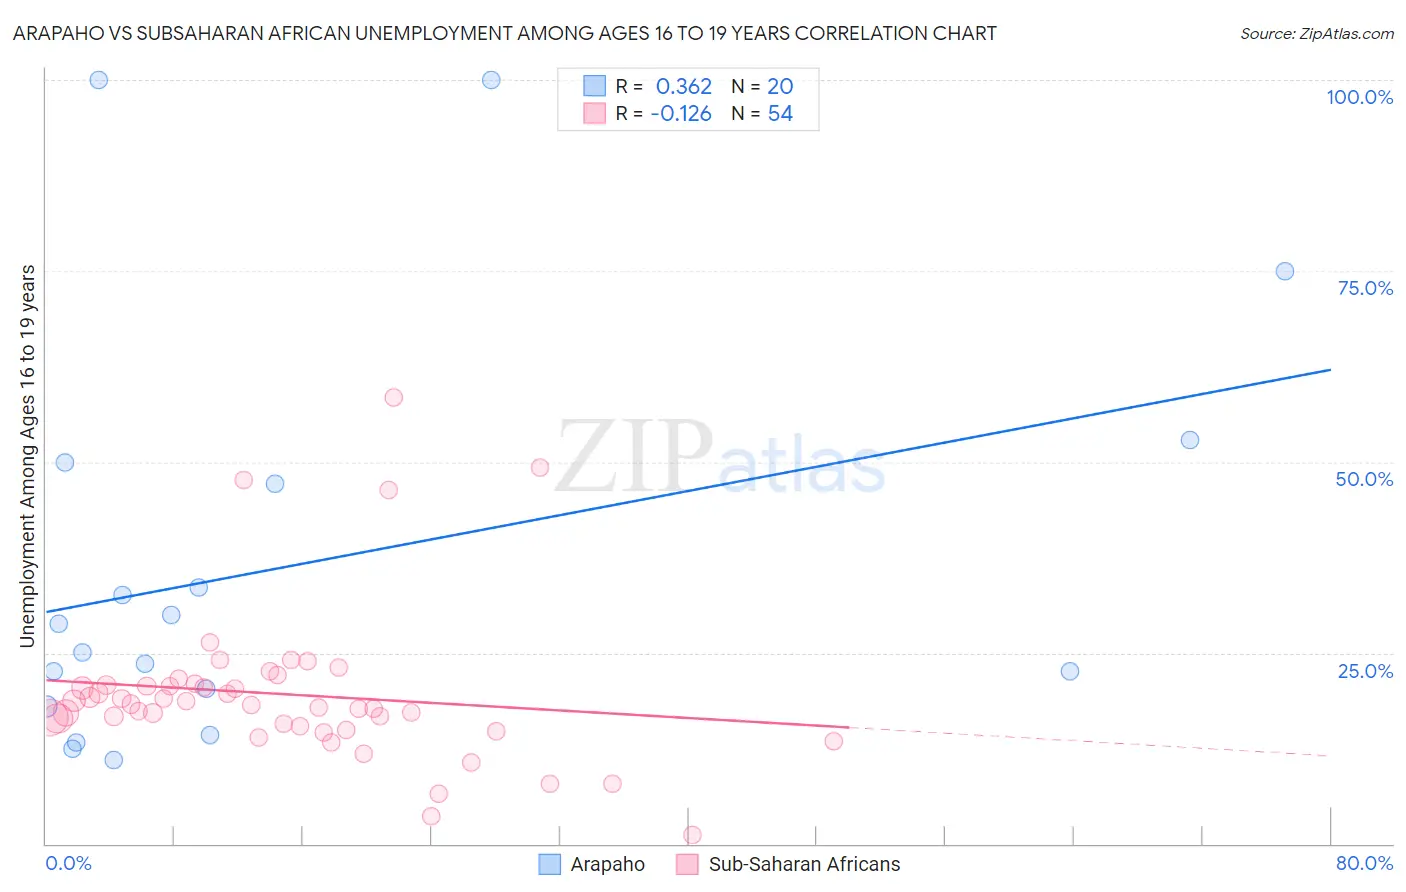 Arapaho vs Subsaharan African Unemployment Among Ages 16 to 19 years